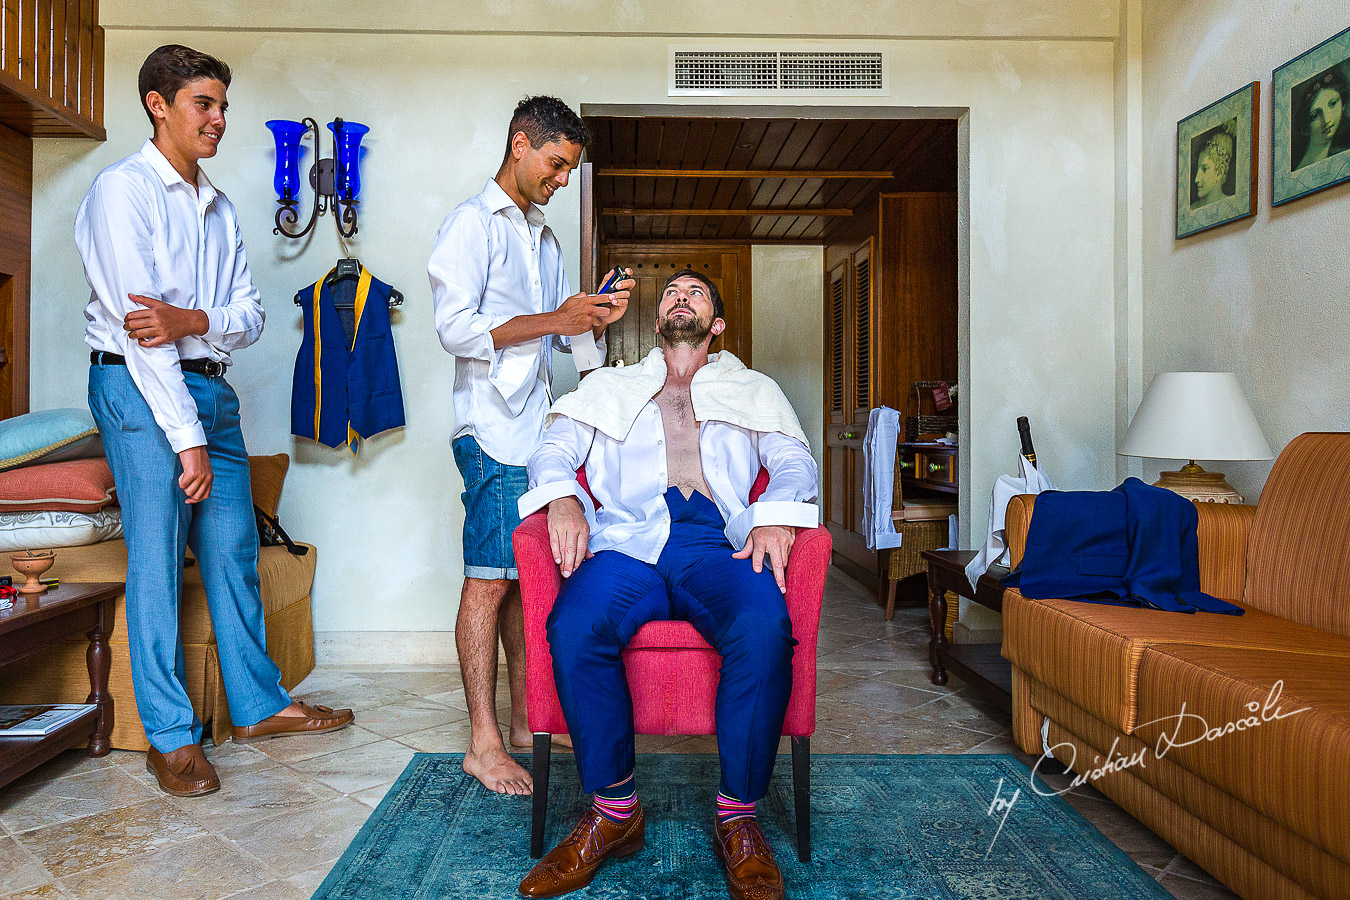 Traditional Groom Shaving, before the wedding Ceremony at the Elysium Hotel in Paphos.